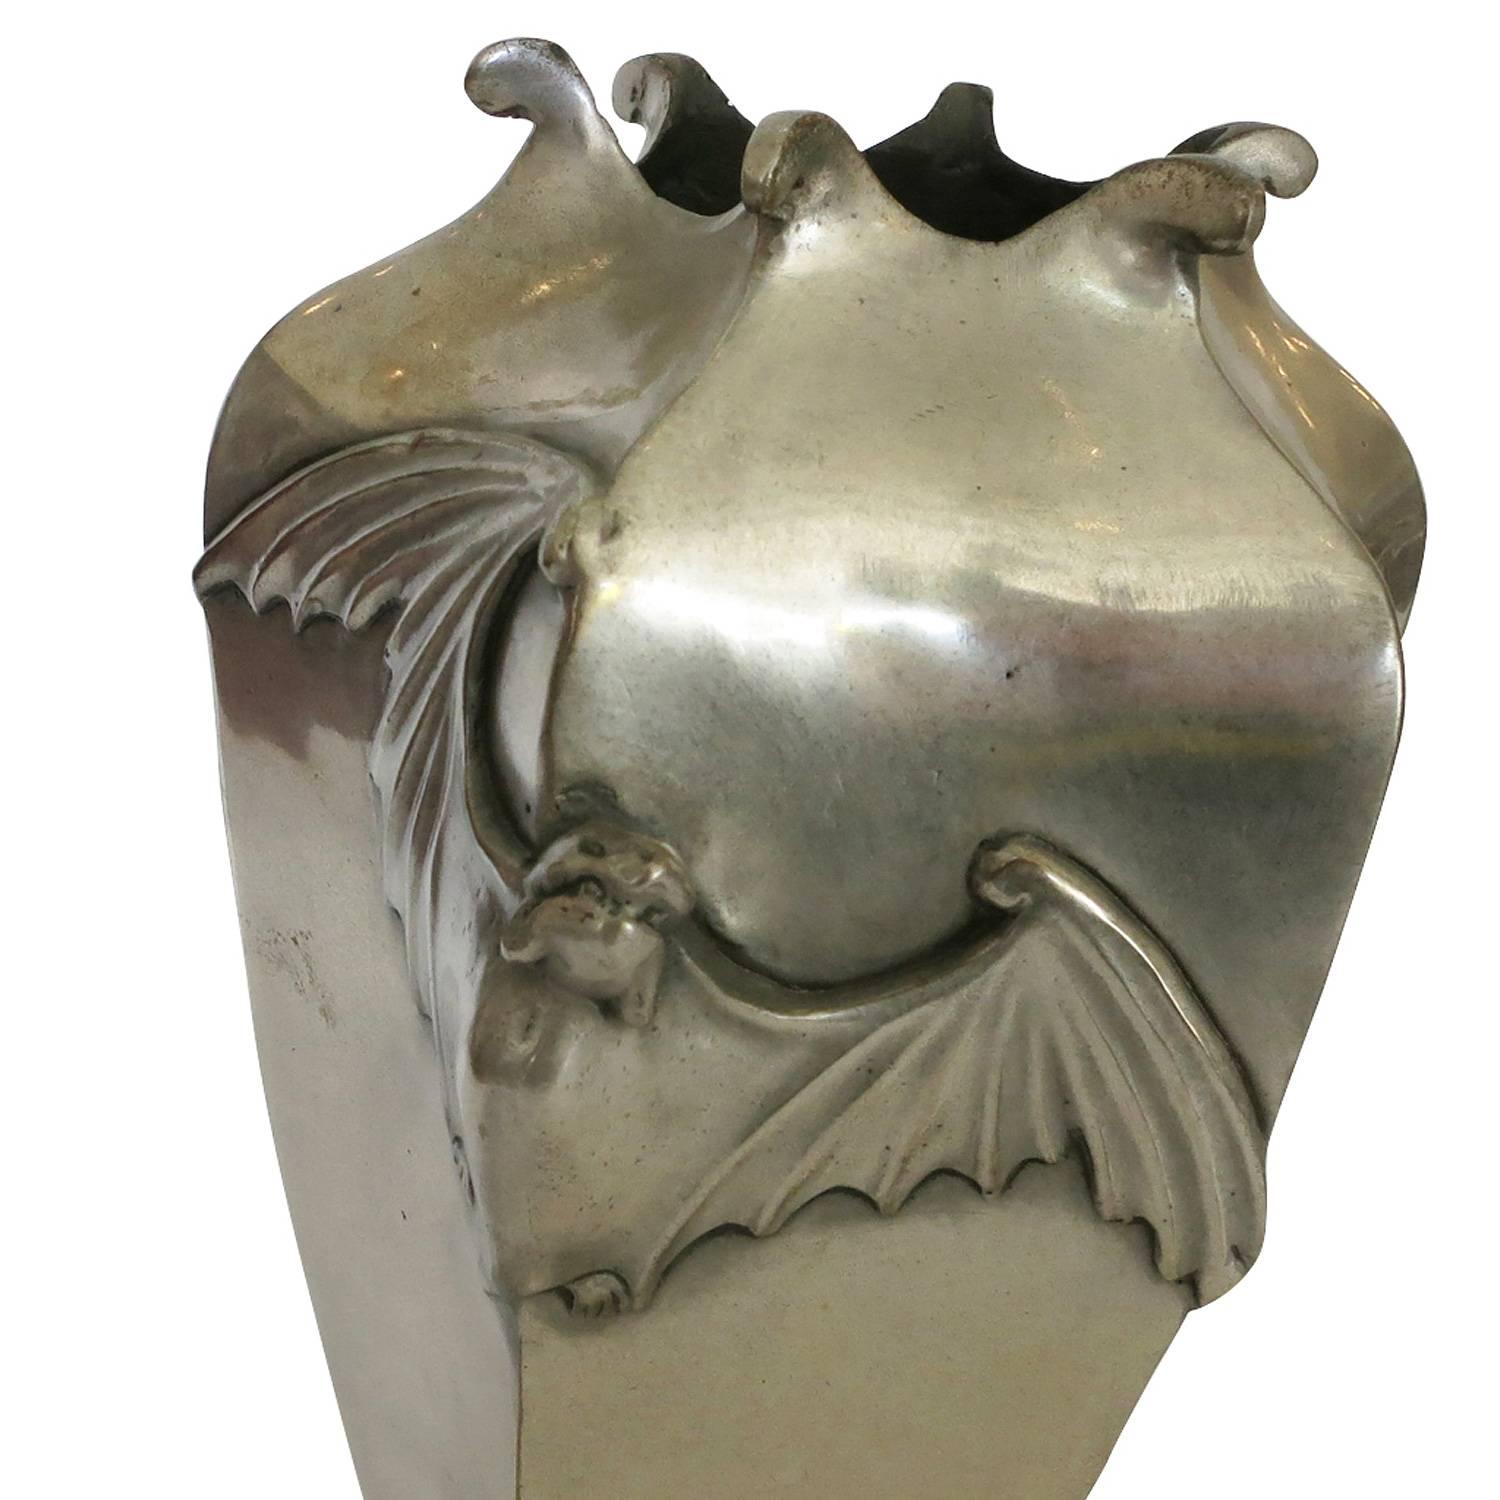 American 19th Century Japanese Style Bat Vase Cast in Bronze, Antique Silver Plated